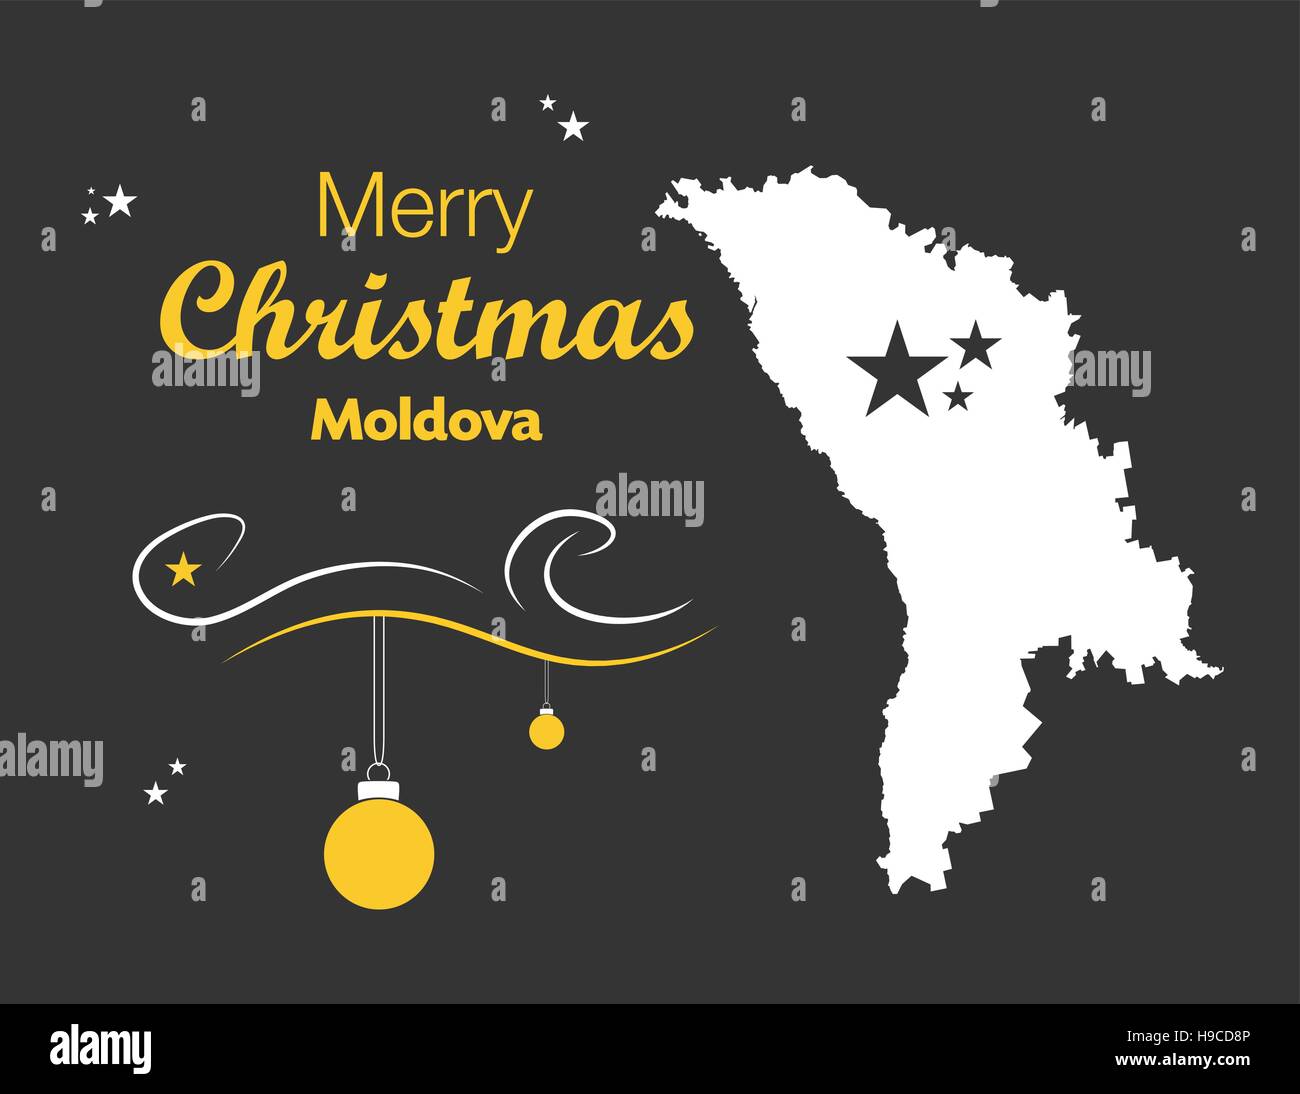 Merry Christmas illustration theme with map of Moldova Stock Vector